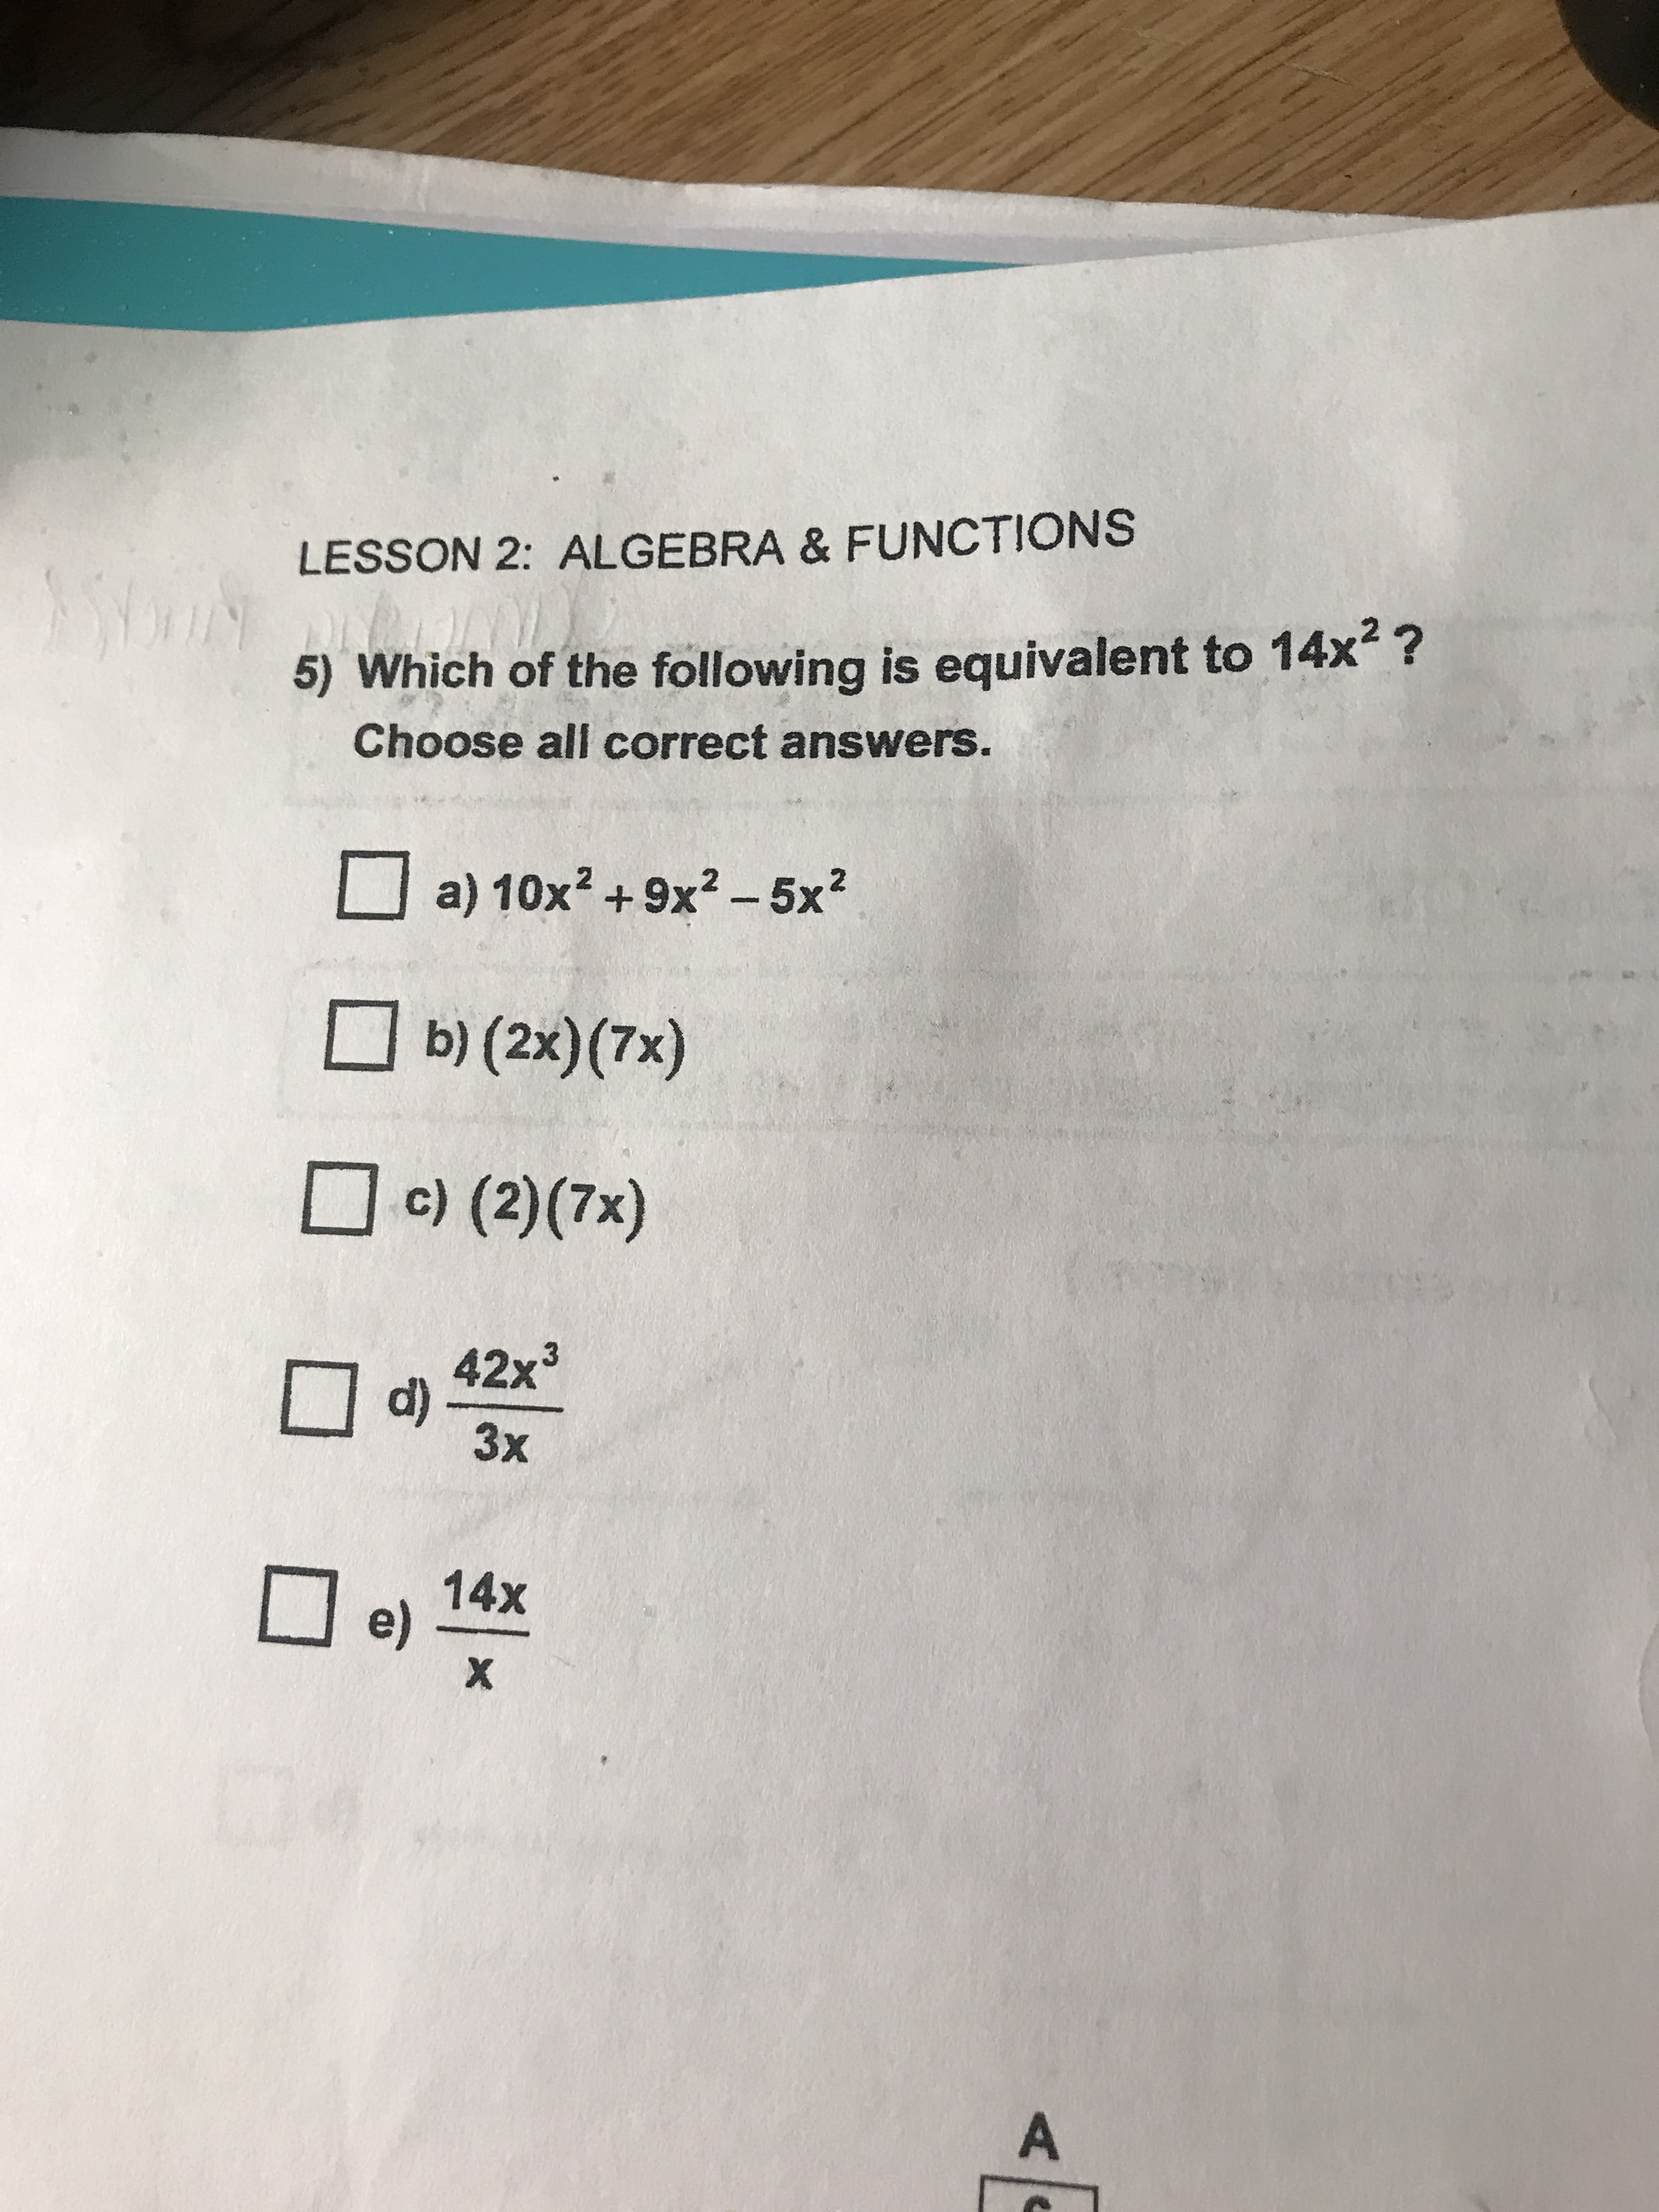 LESSON 2: ALGEBRA & FUNCTIONS
NXwh
5) Which of the following is equivalent to 14x?
Choose all correct answers.
a) 10x2+9x2 -5x2
b) (2x)(7x)
c) (2)(7x)
42x3
d)
3x
14x
e)
X
AC
